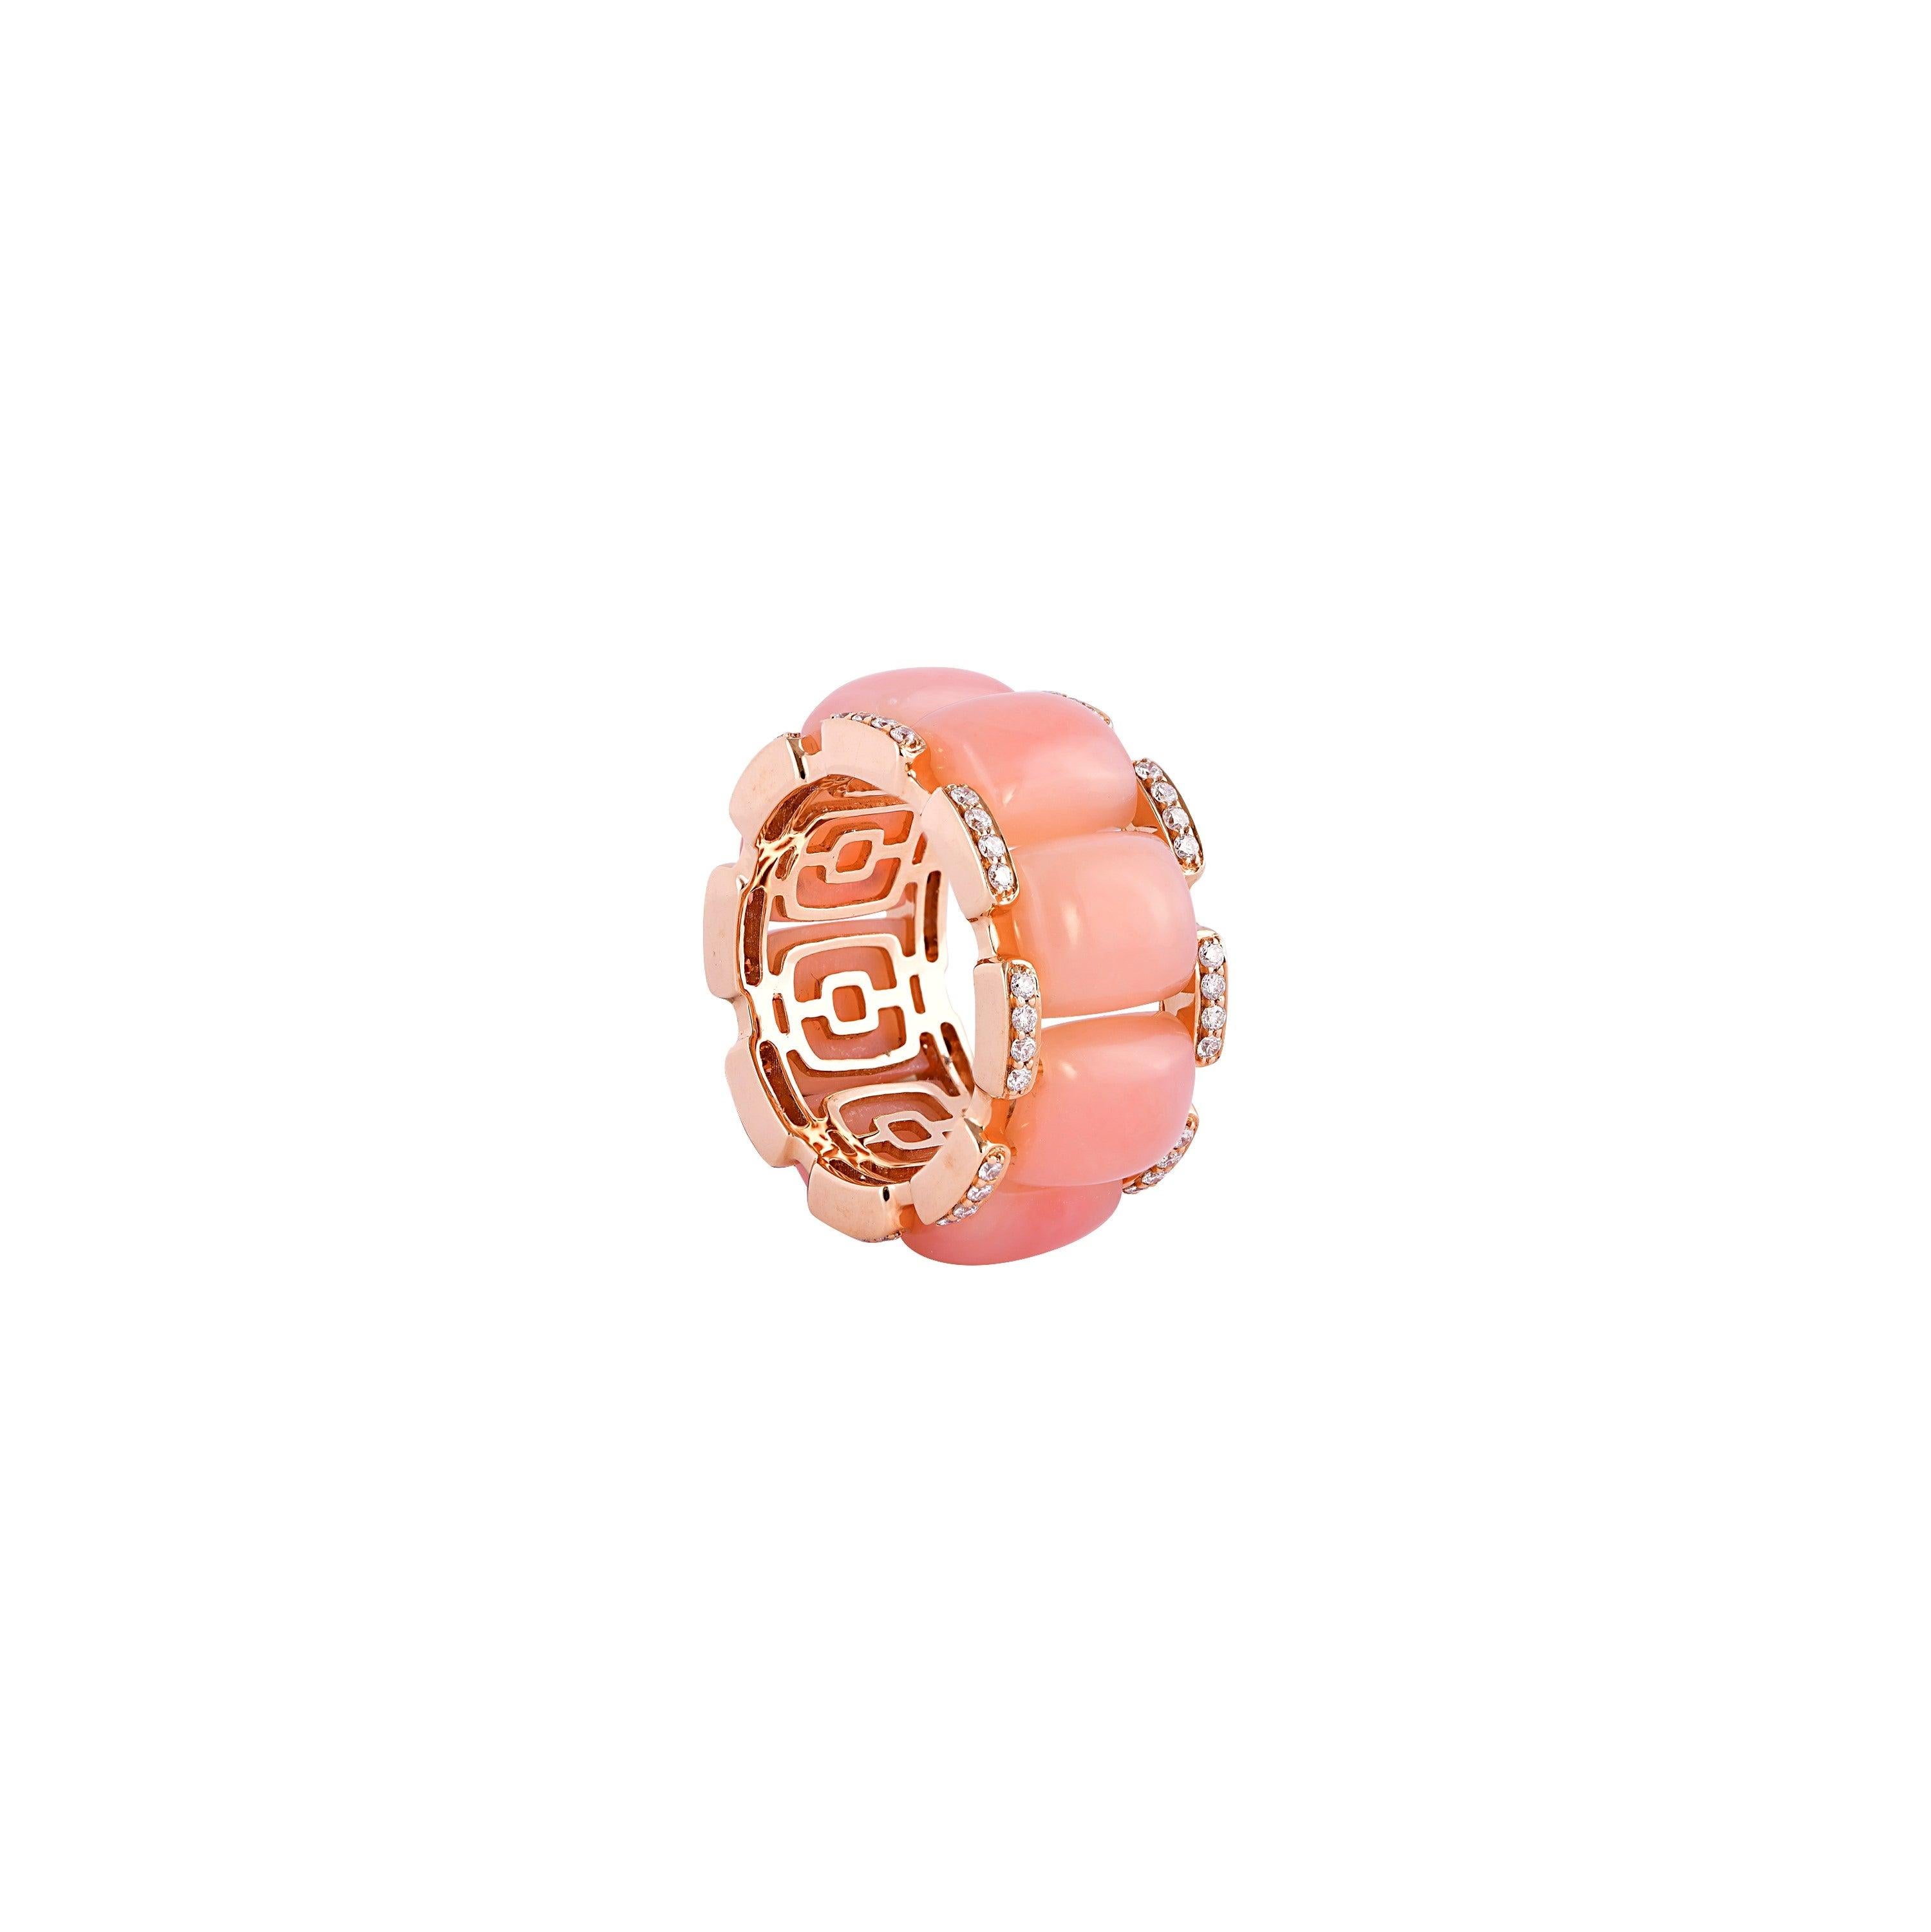 For Sale:  12.3 Carat Pink Opal and White Diamond Ring in 18 Karat Rose Gold 4